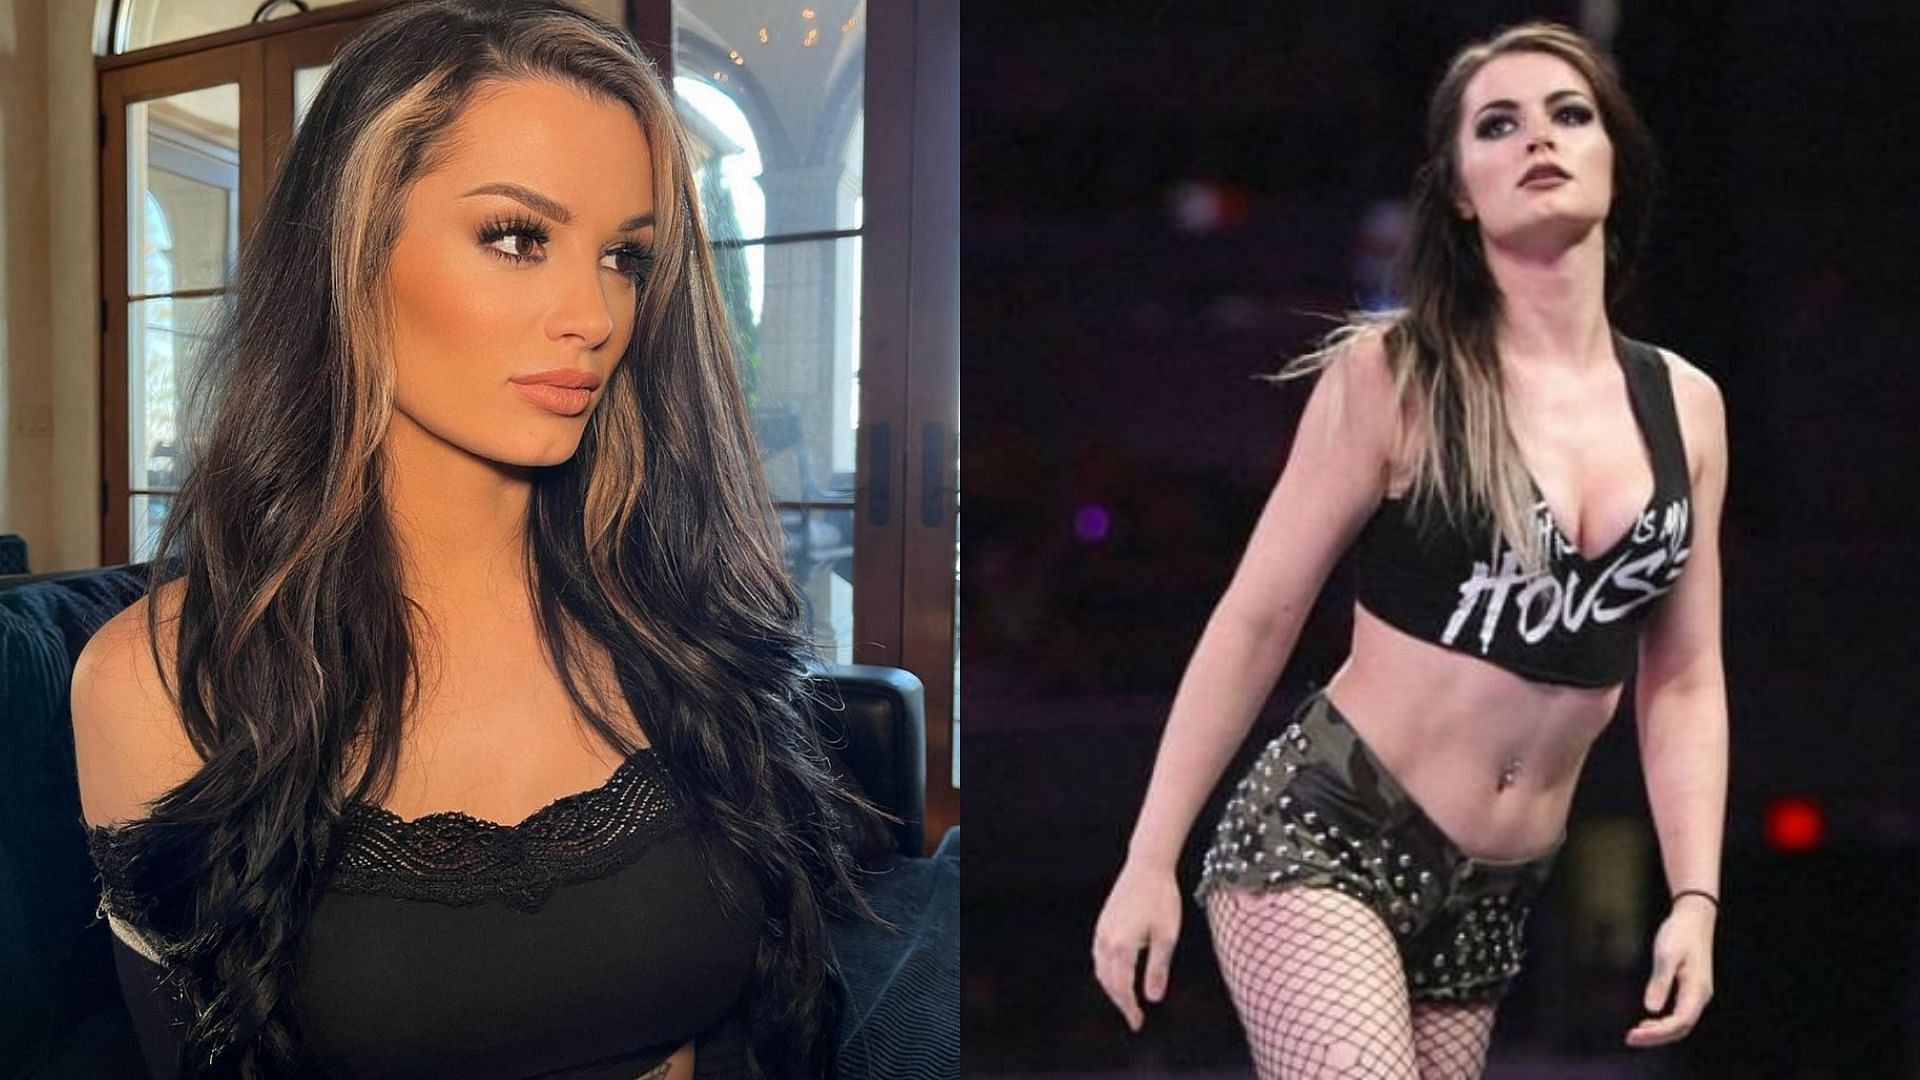 The former two-time Divas Champion retired from in-ring competition in 2018